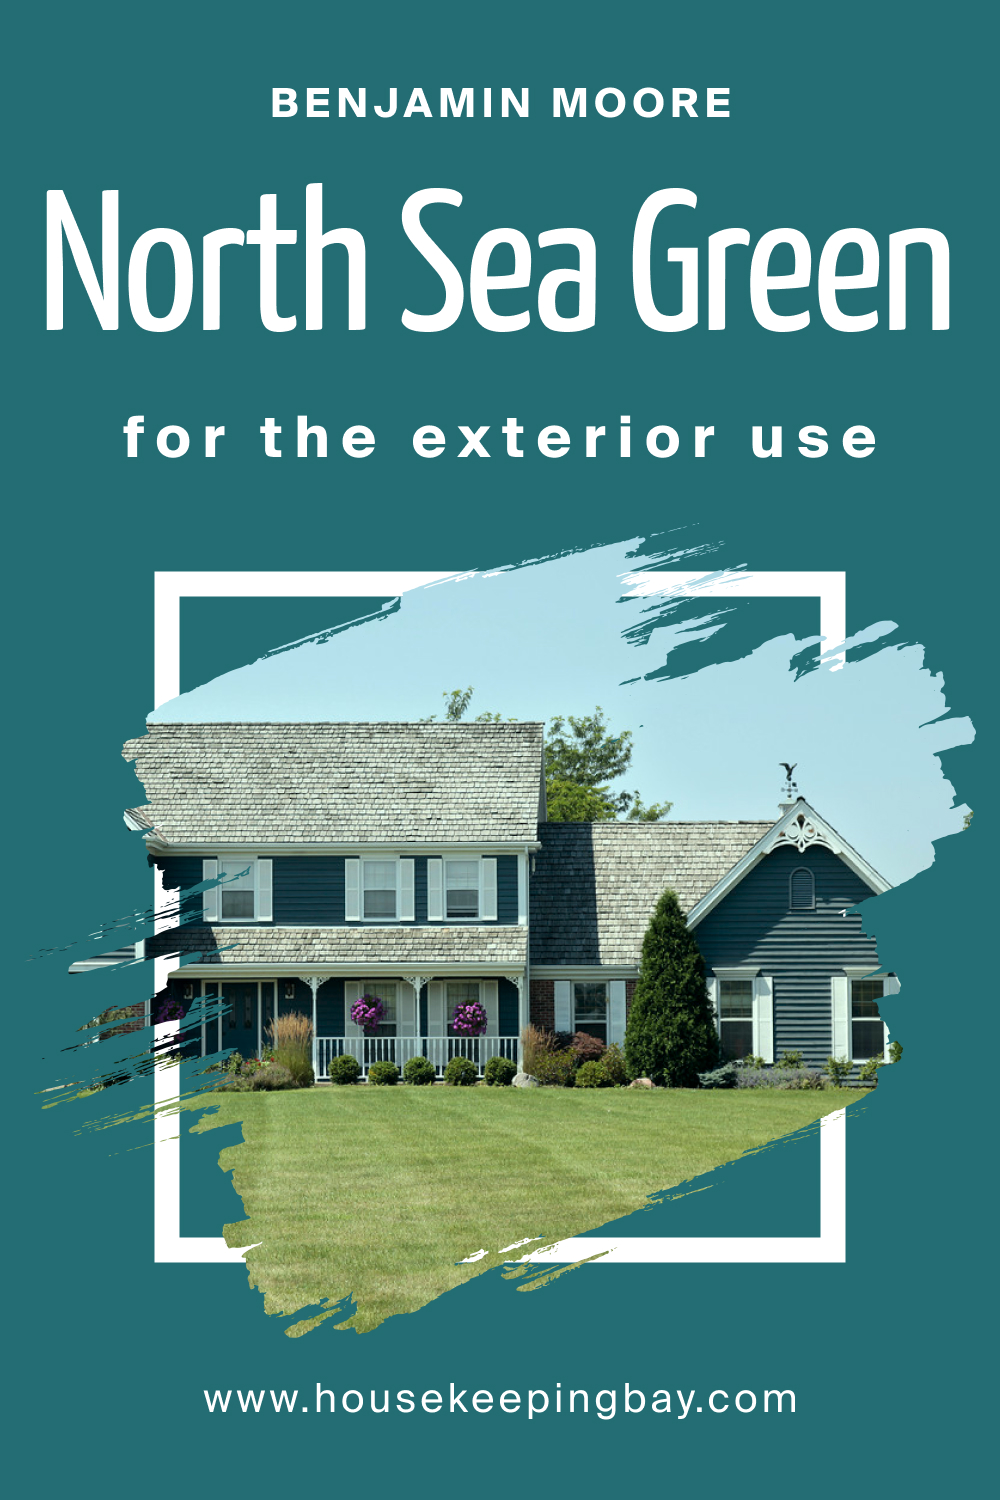 Benjamin Moore. North Sea Green 2053 30 for the Exterior Use